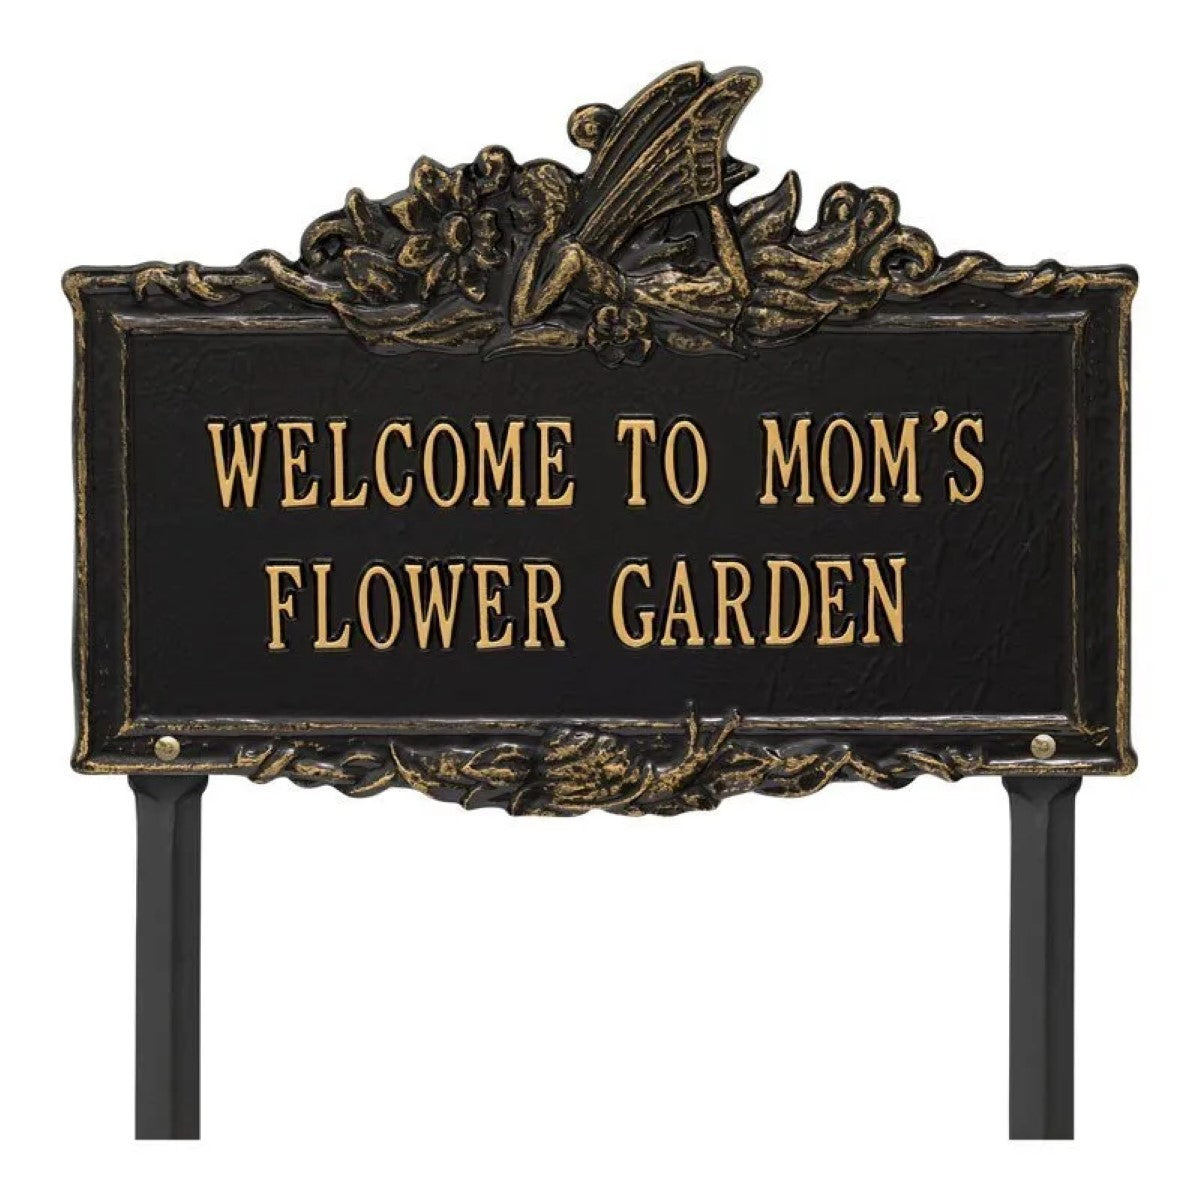 Whitehall Fairy Garden Personalized Lawn Plaque